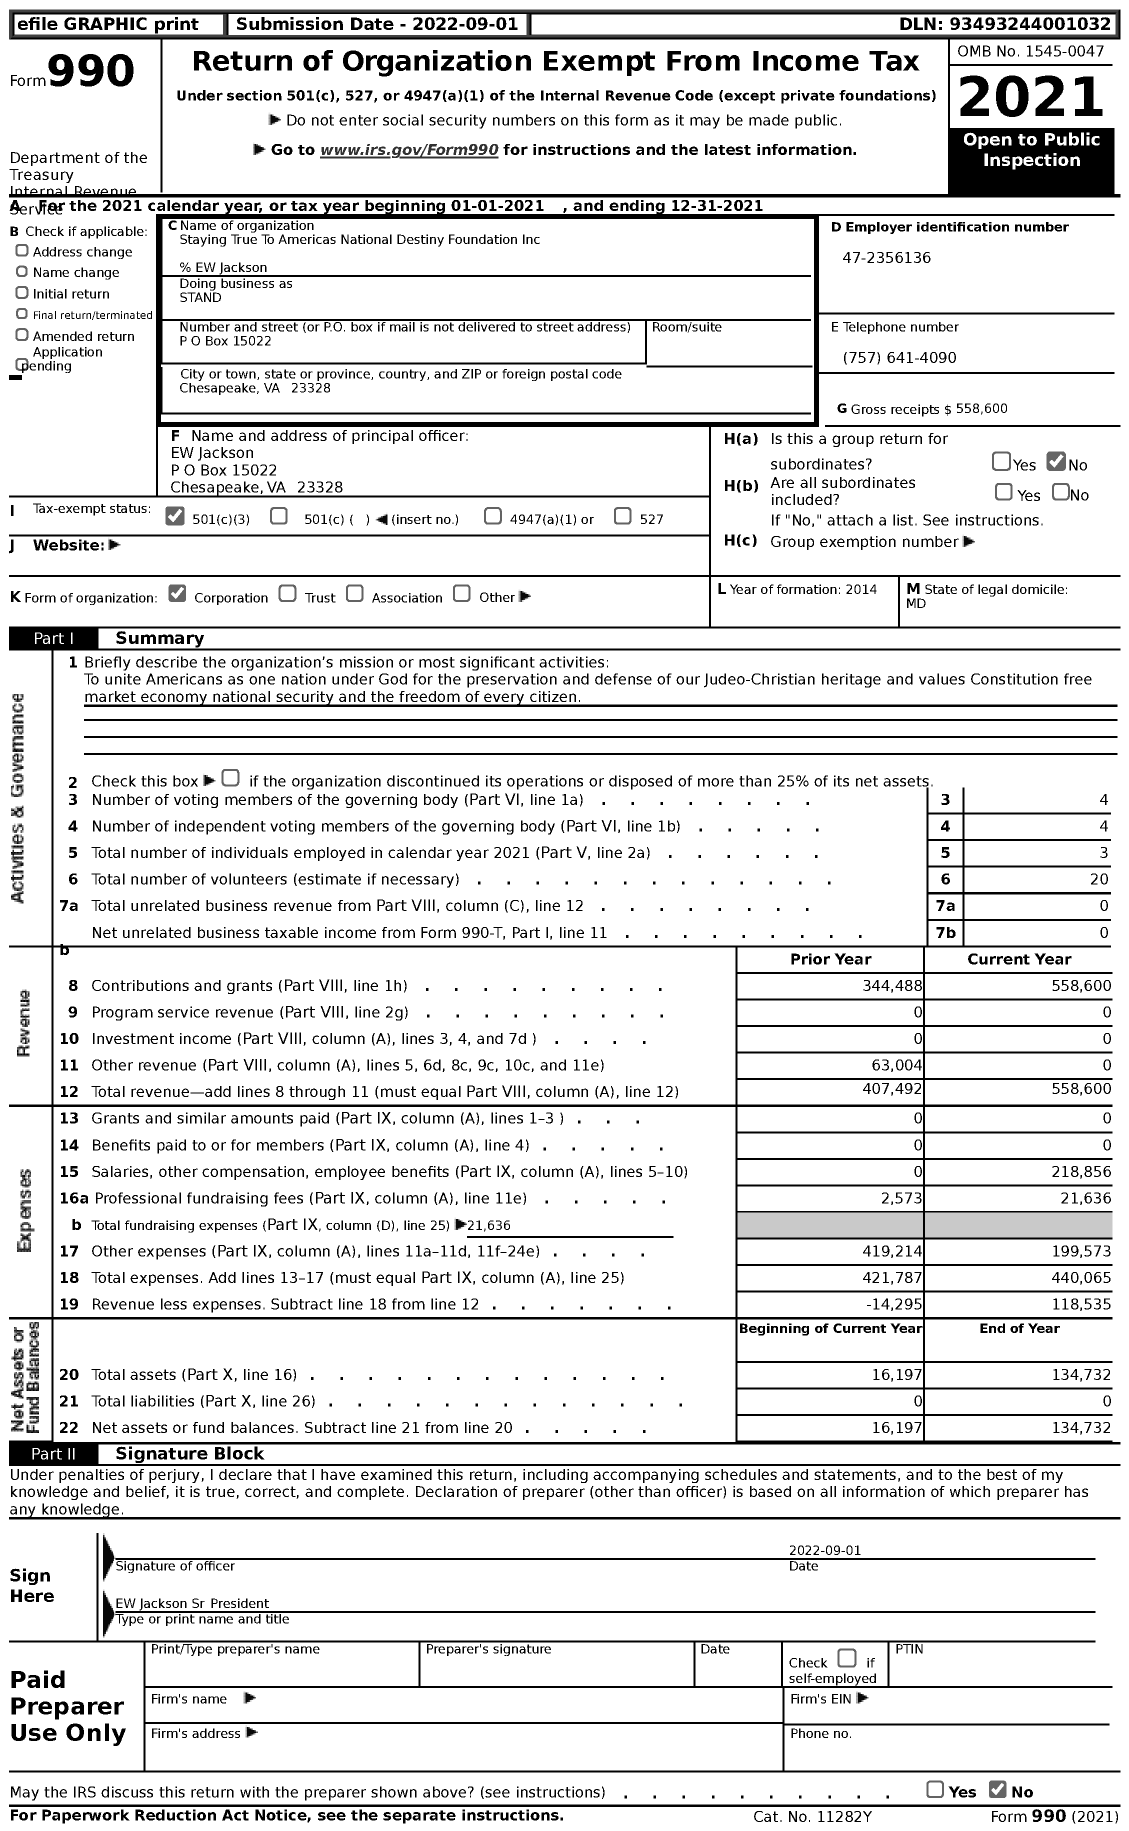 Image of first page of 2021 Form 990 for Stand / Staying True To Americas National Destiny Foundation Inc